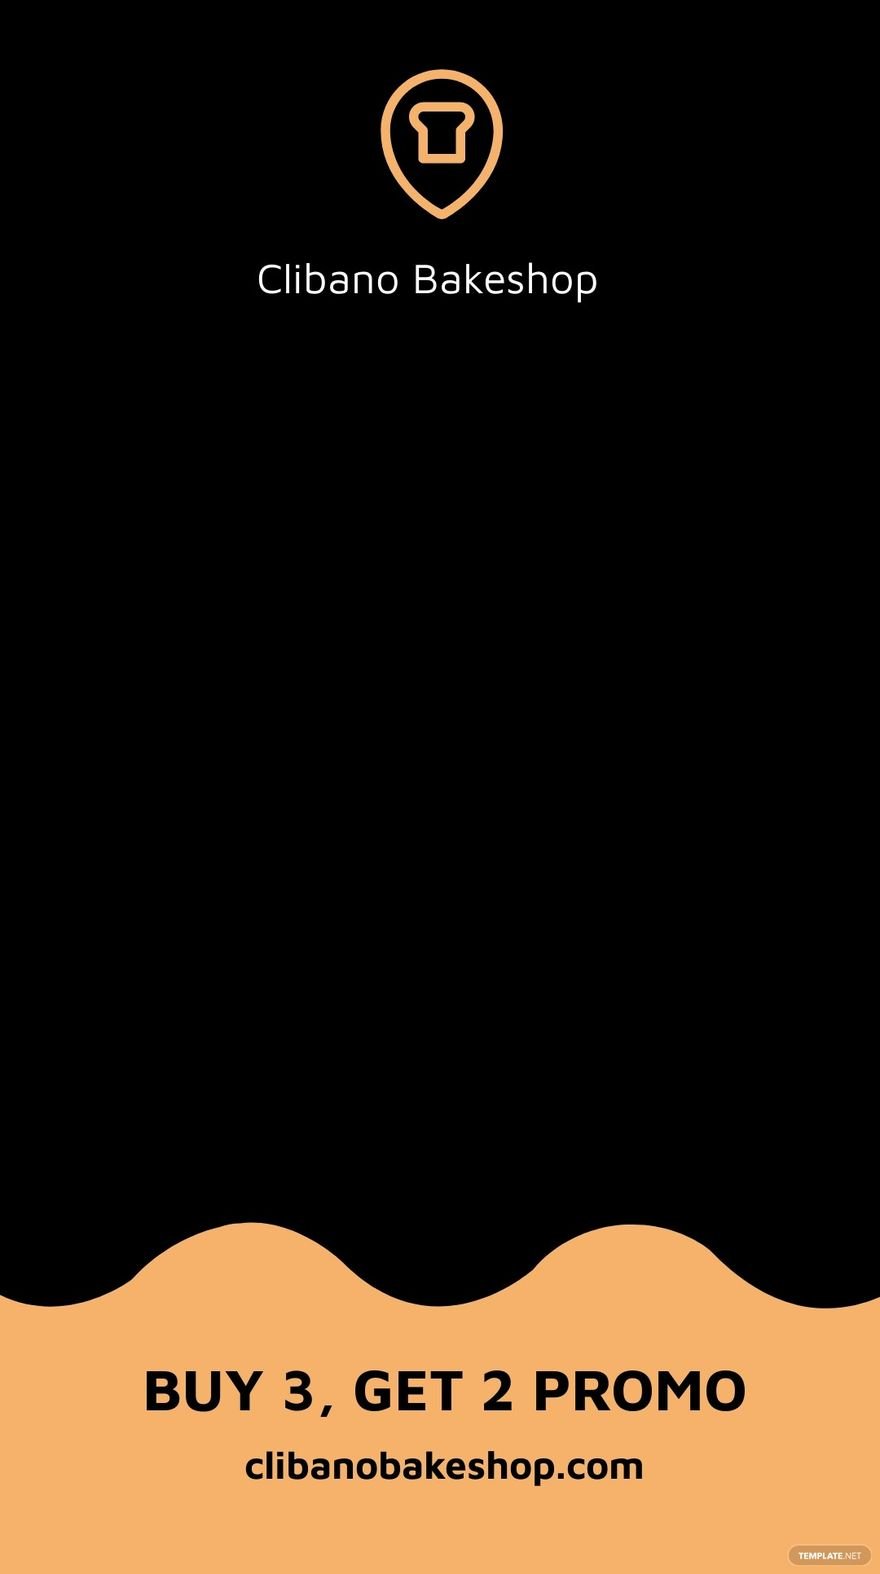 Free Bakery Business Promotion Snapchat Geofilter Template